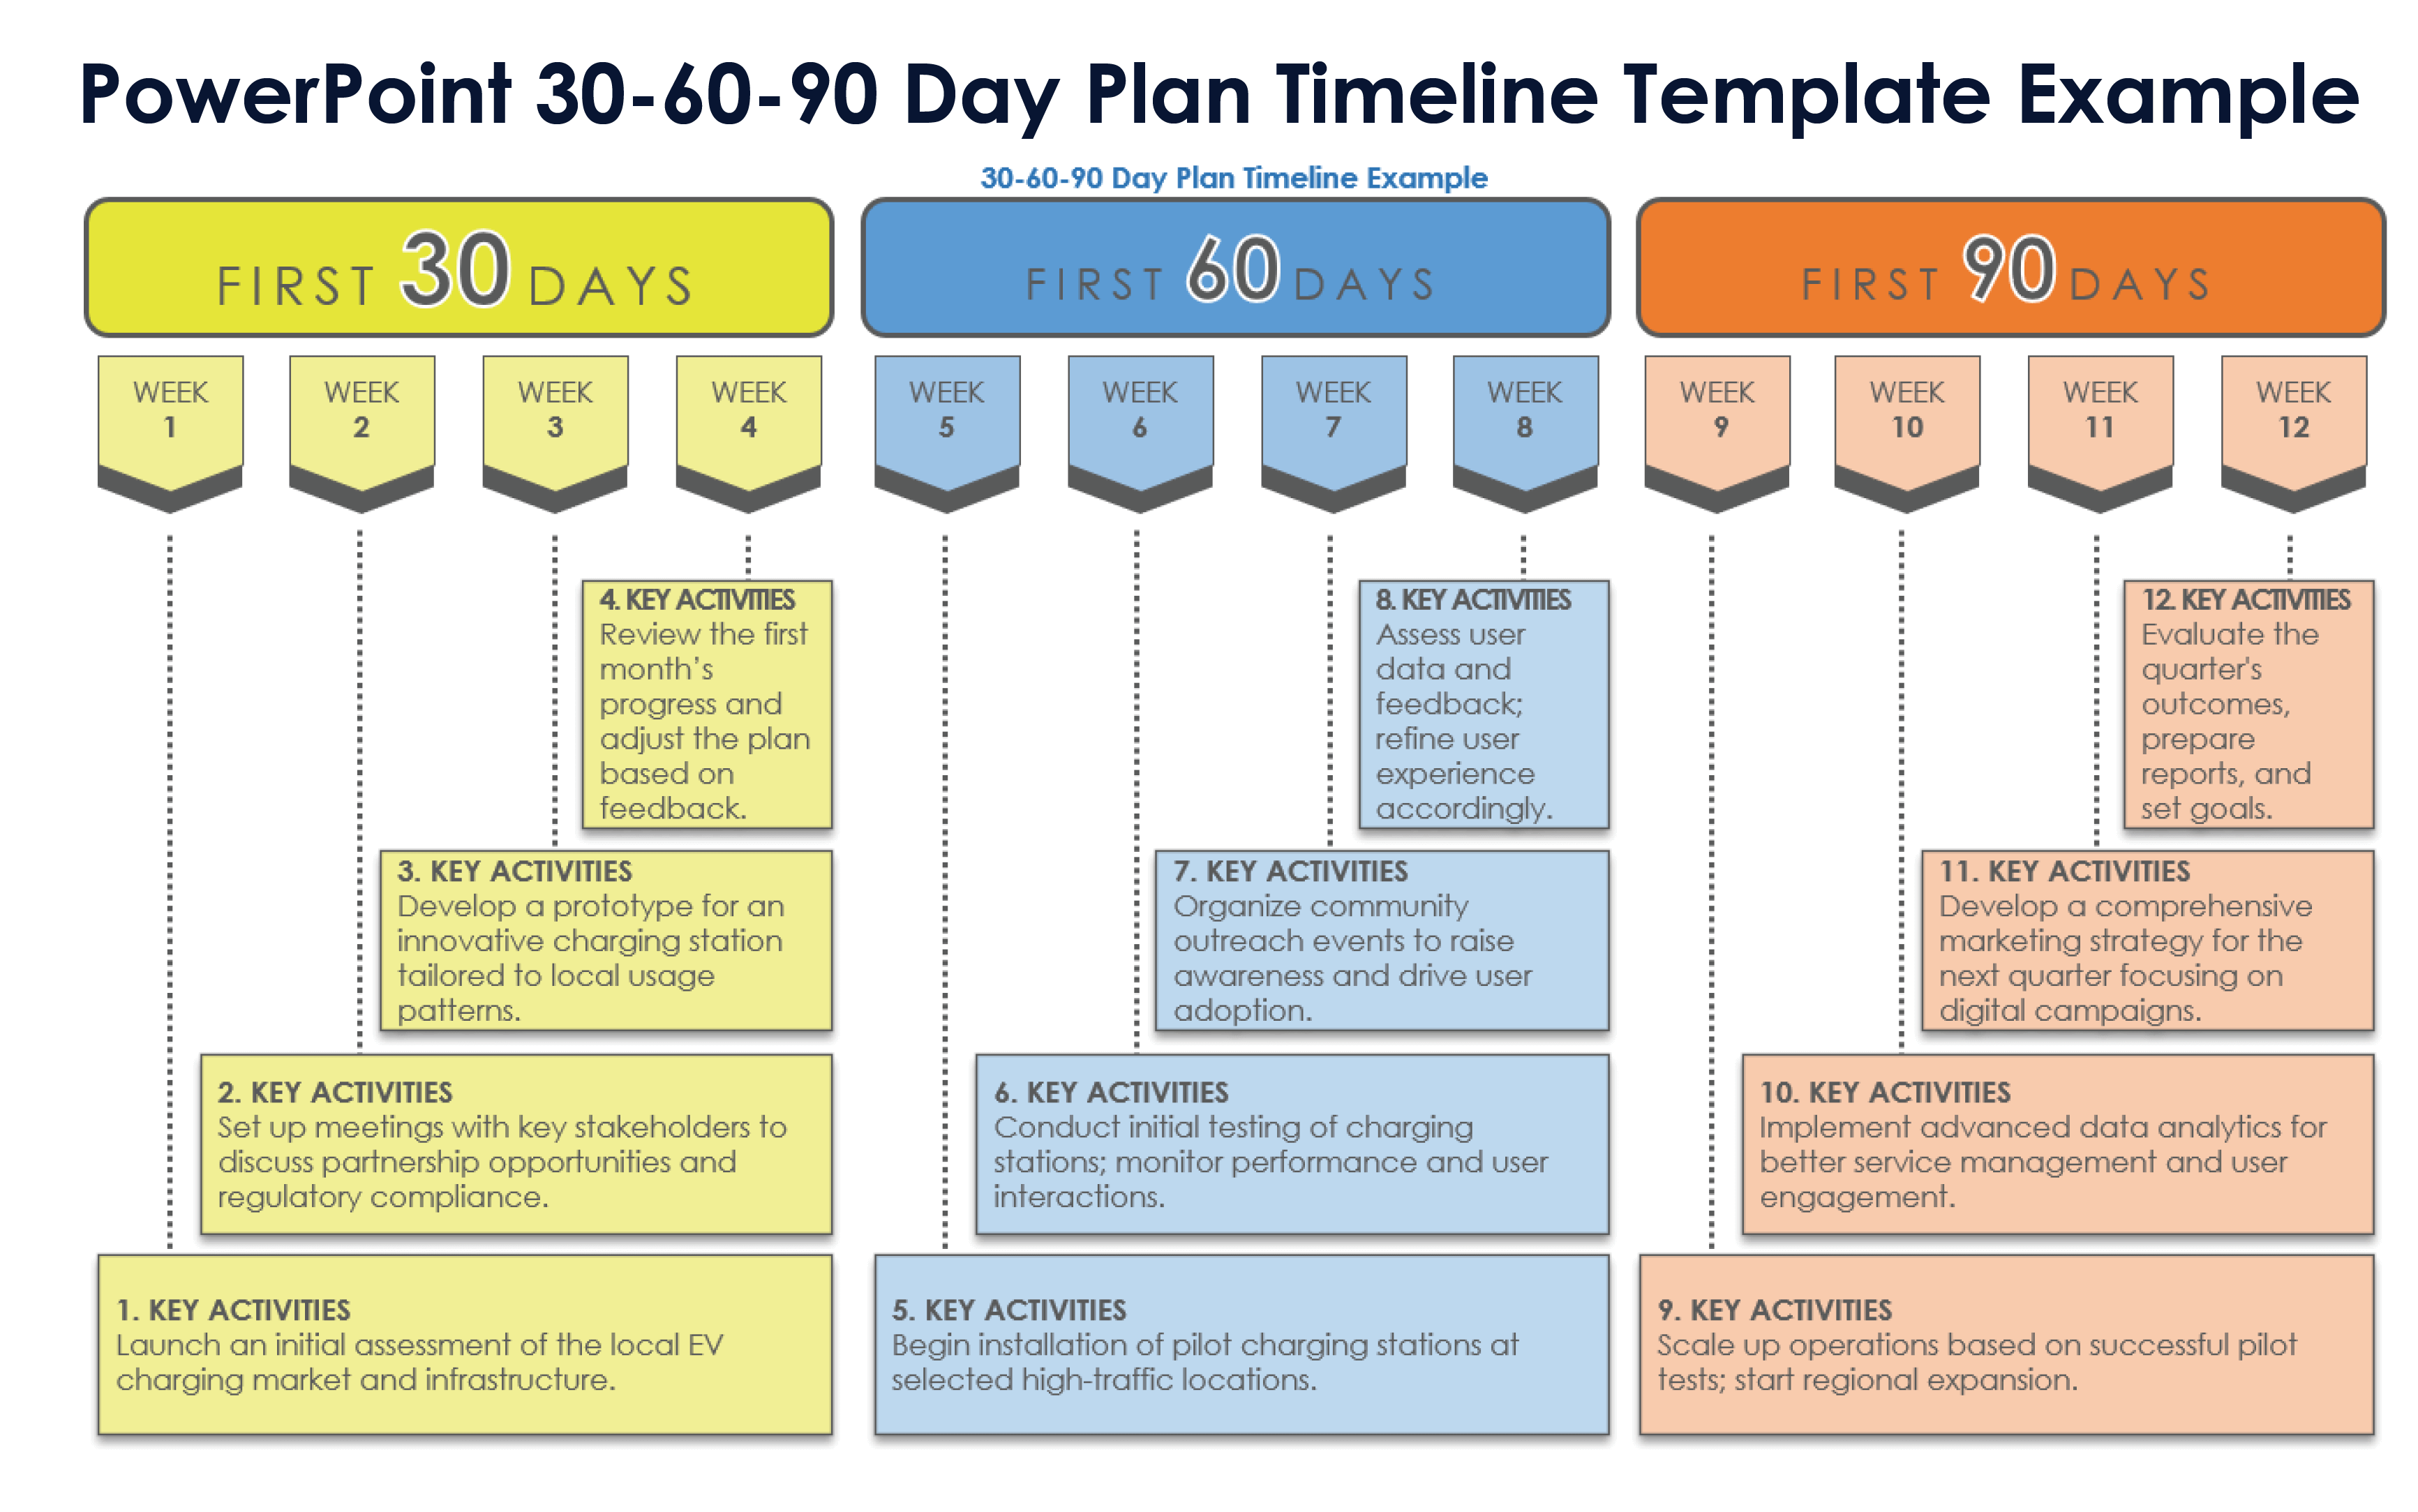 PowerPoint 30-60-90-Day Plan Timeline Template Example